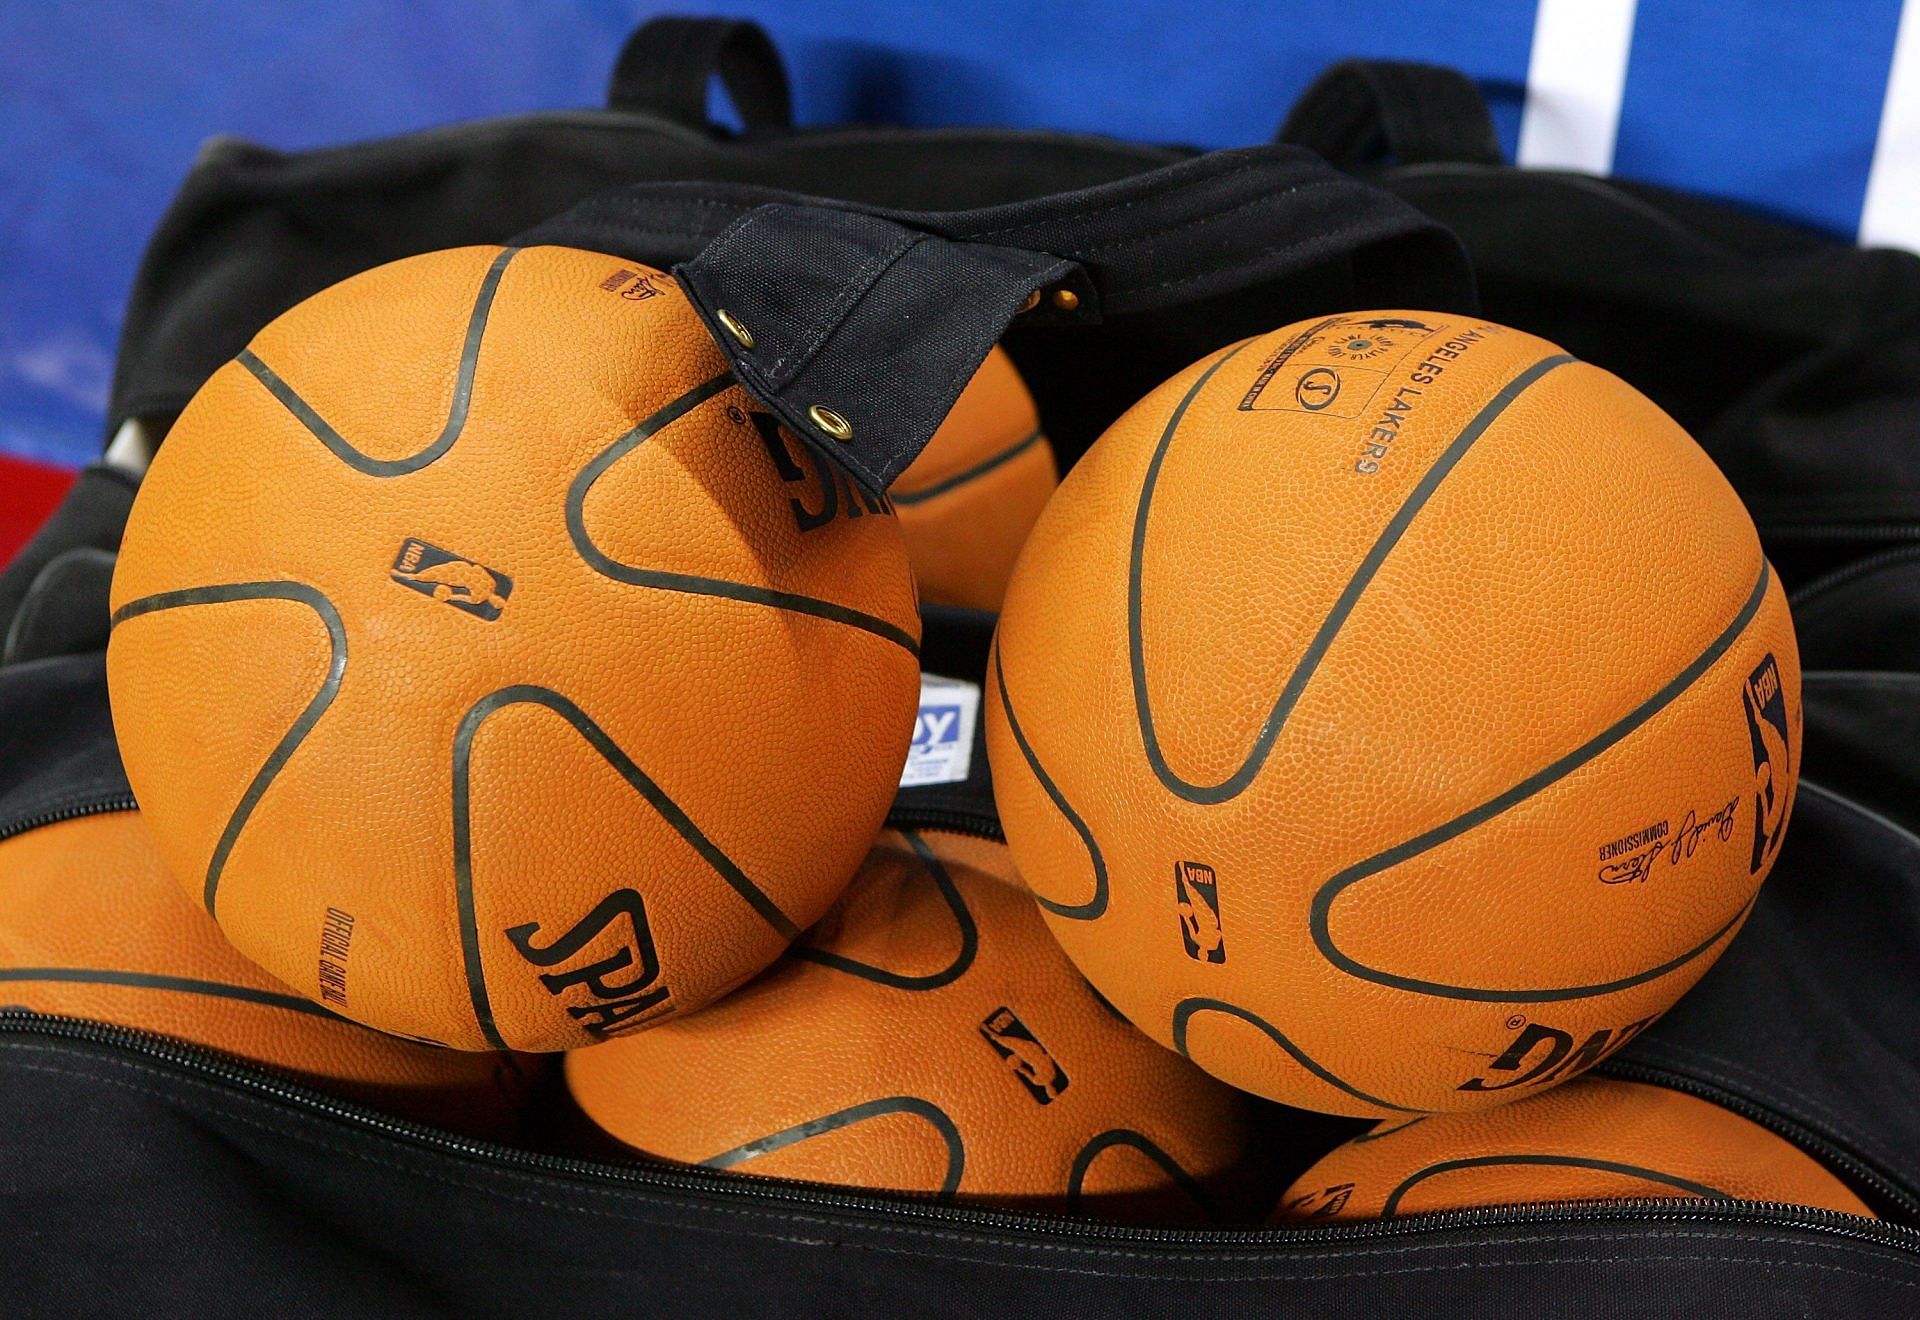 Spalding&#039;s basketball experiment did not work out (Image via Getty Images)